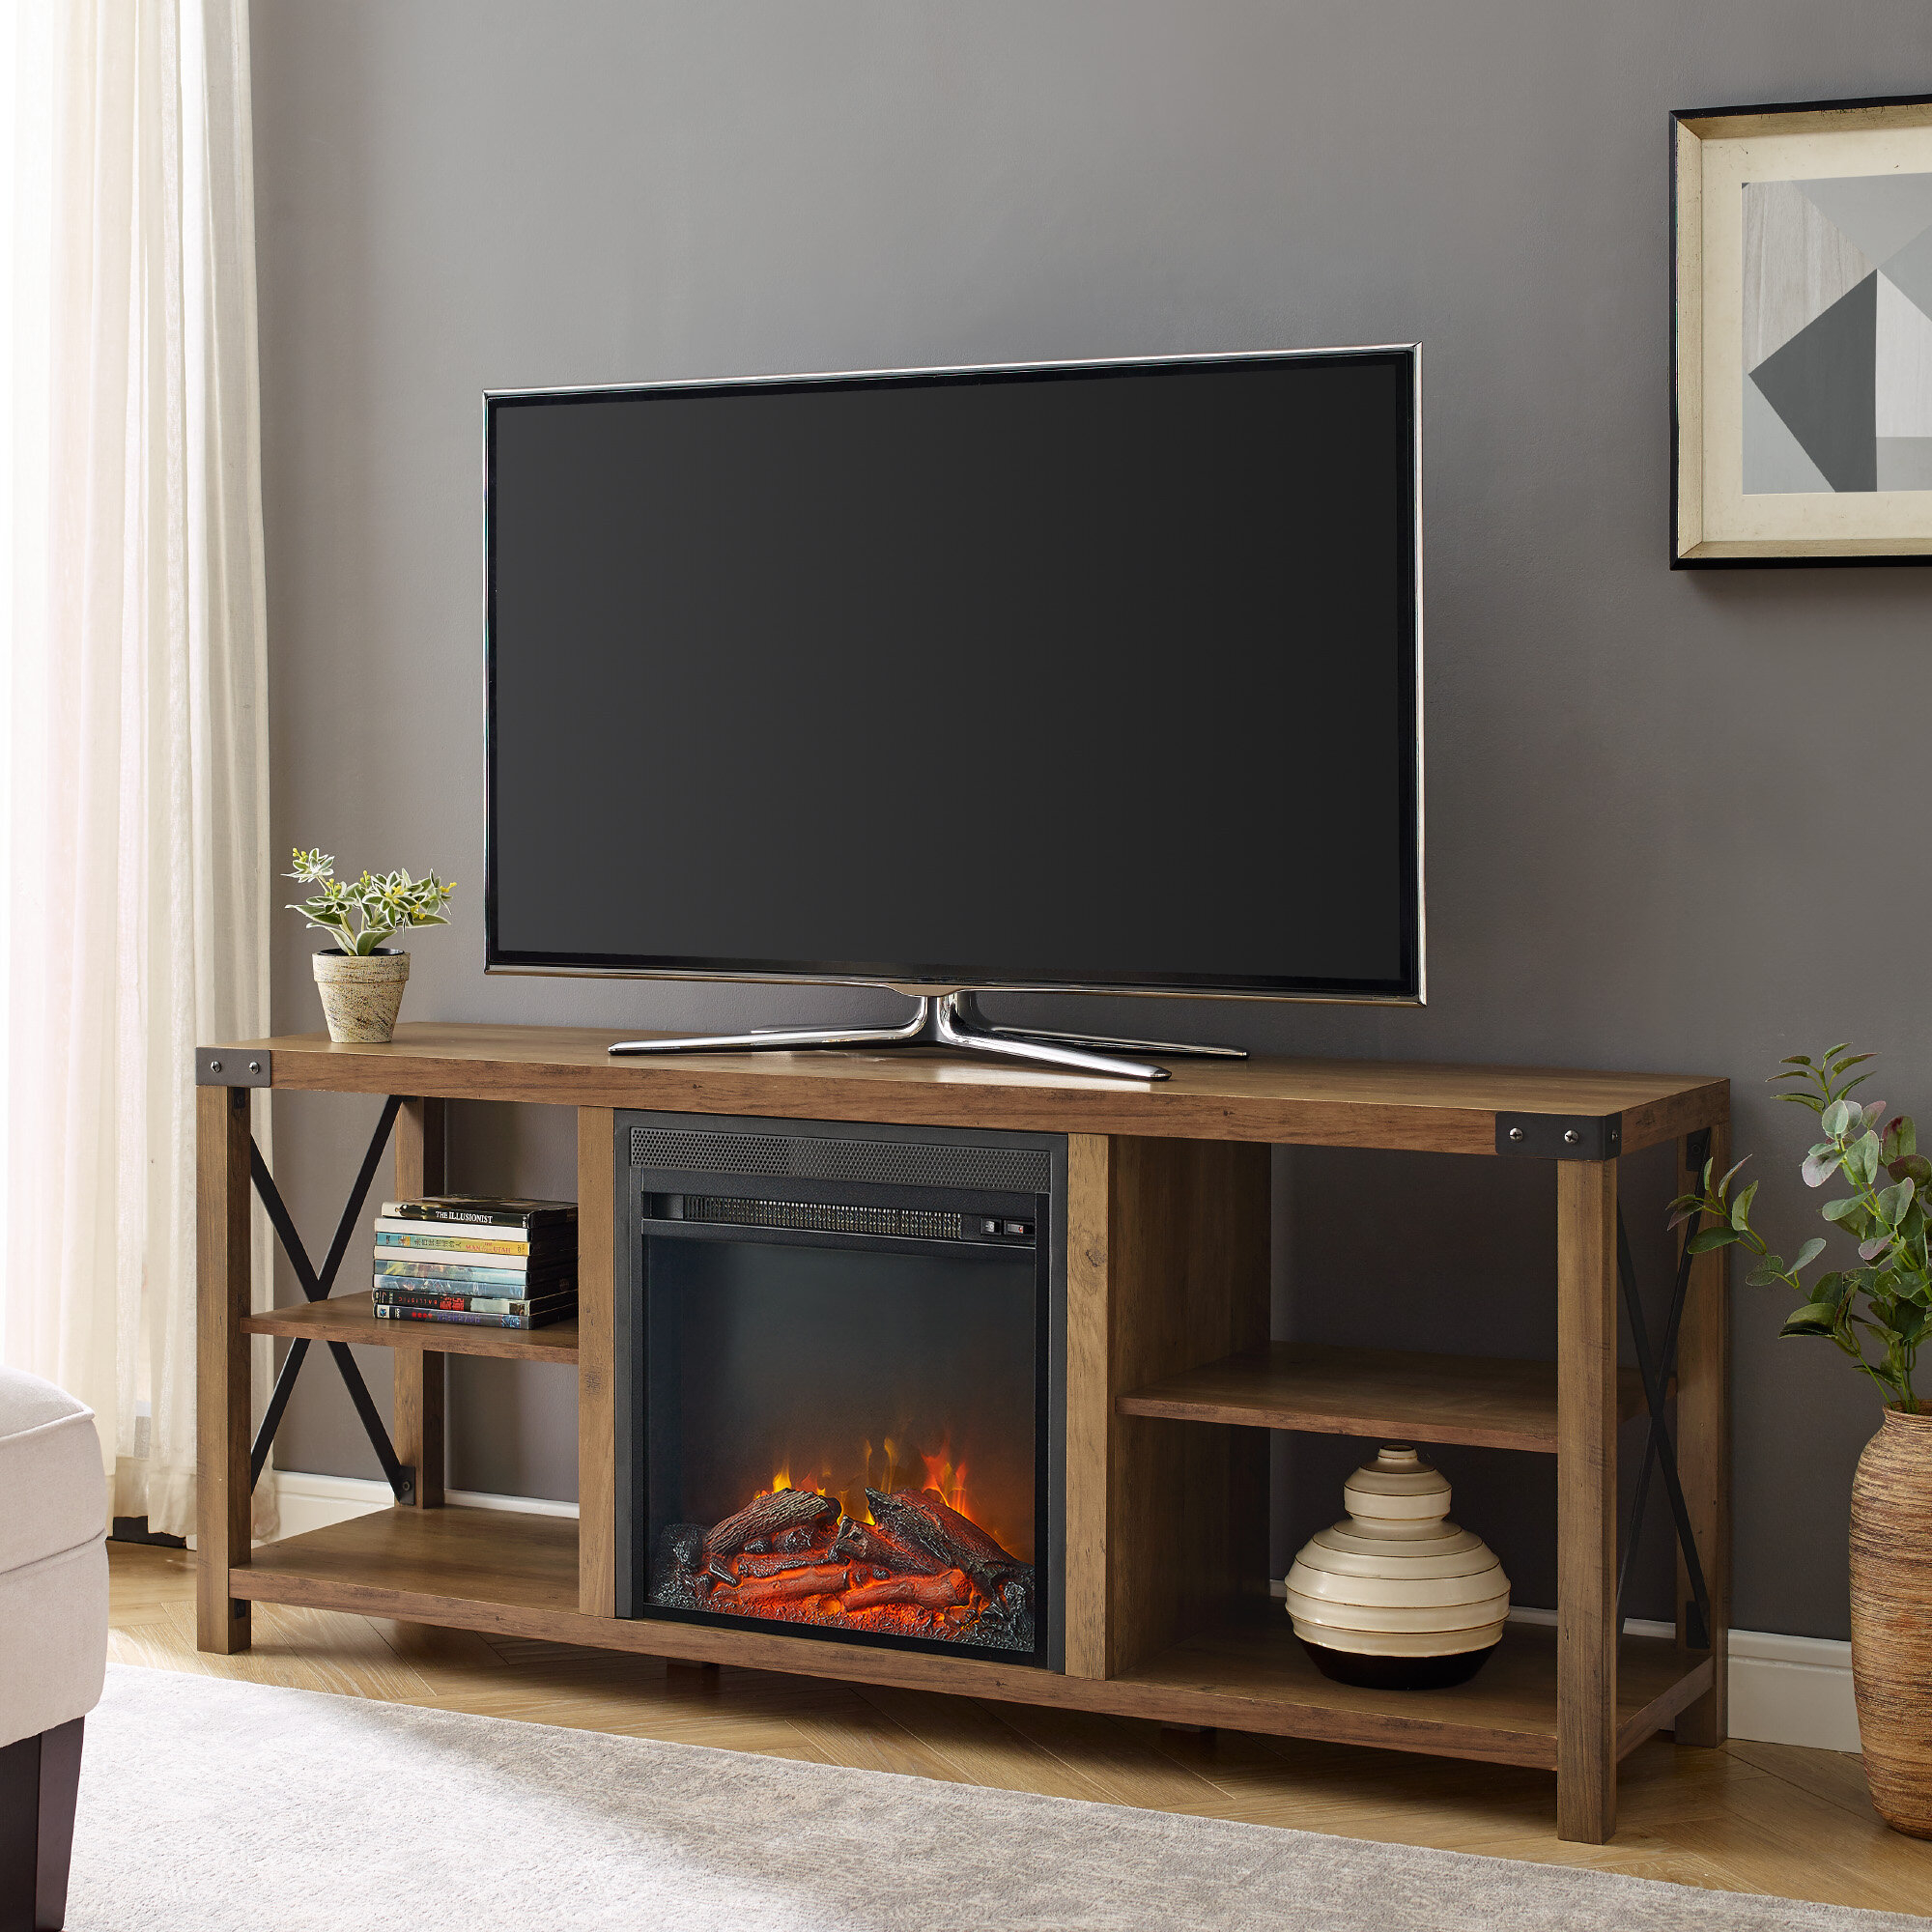 Kass TV Stand for TVs up to 65" with Electric Fireplace Included